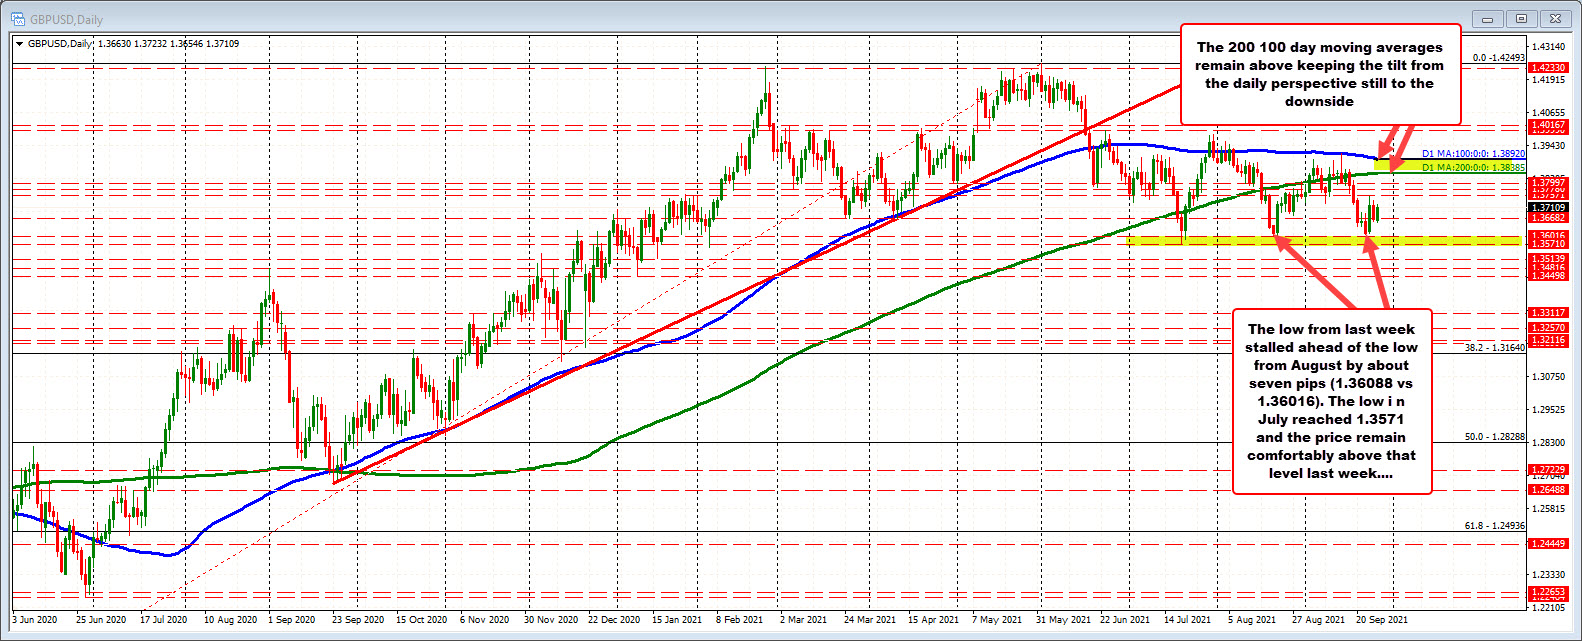 GBPUSD on the daily chart. 